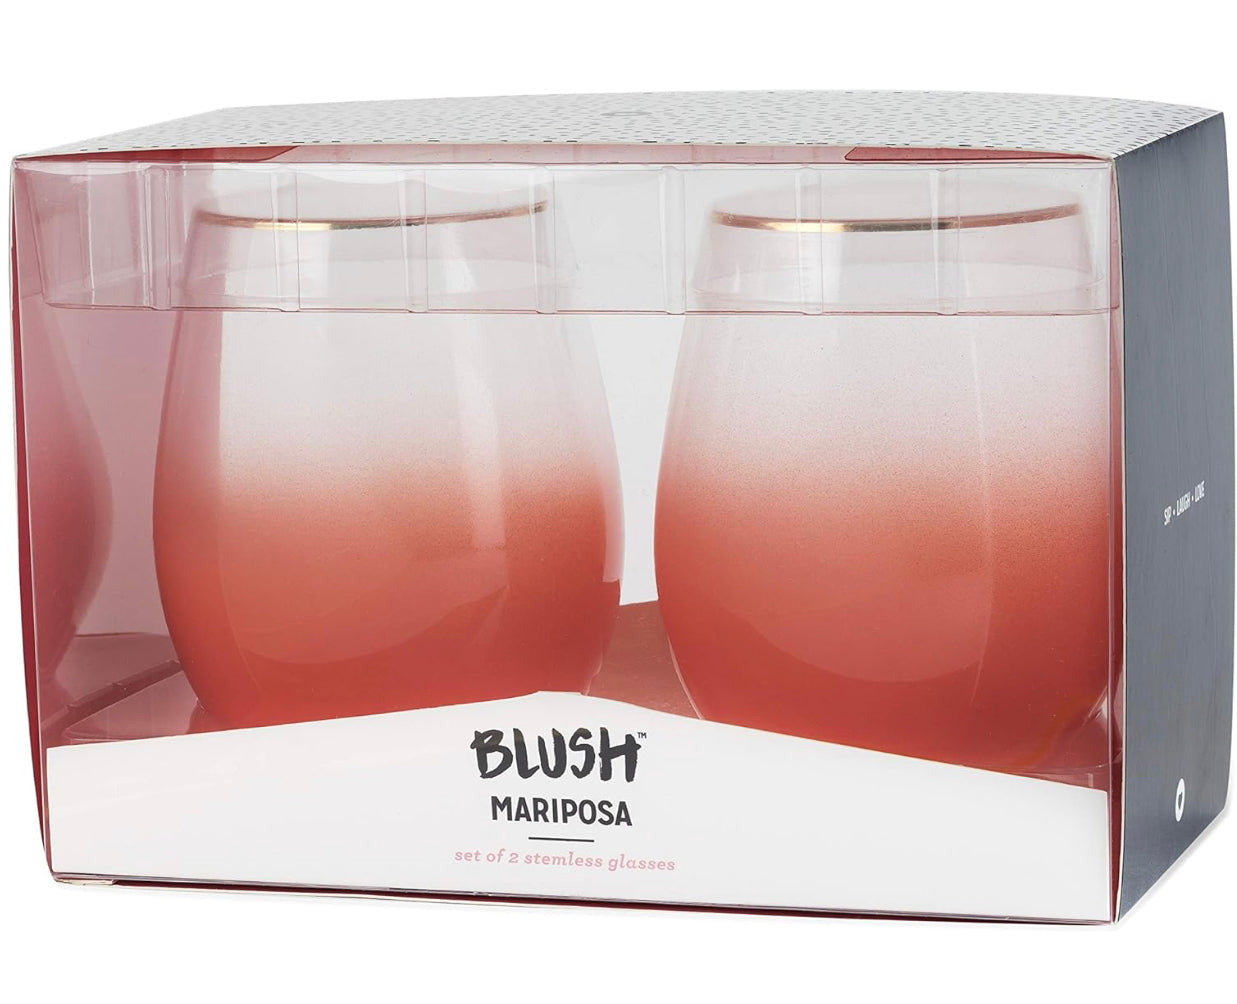 Sip Sip Stemless Wine Glasses by Blush